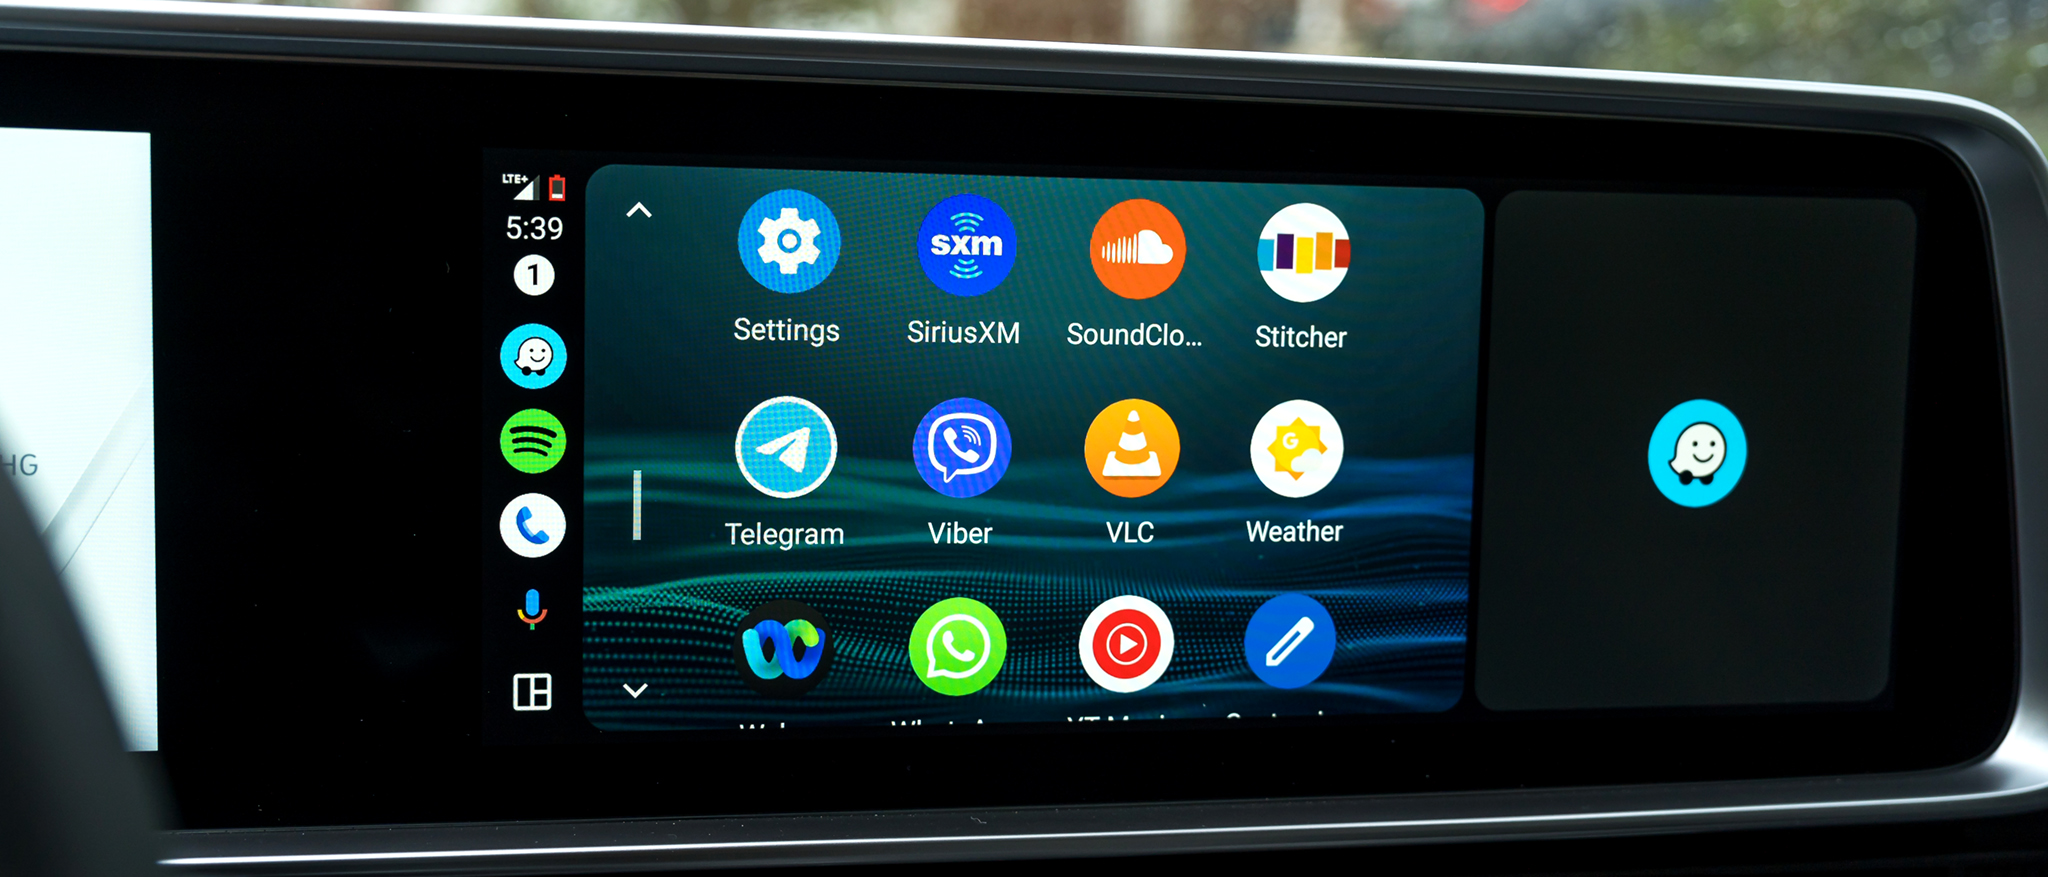 Android Auto review: Everything you need to drive